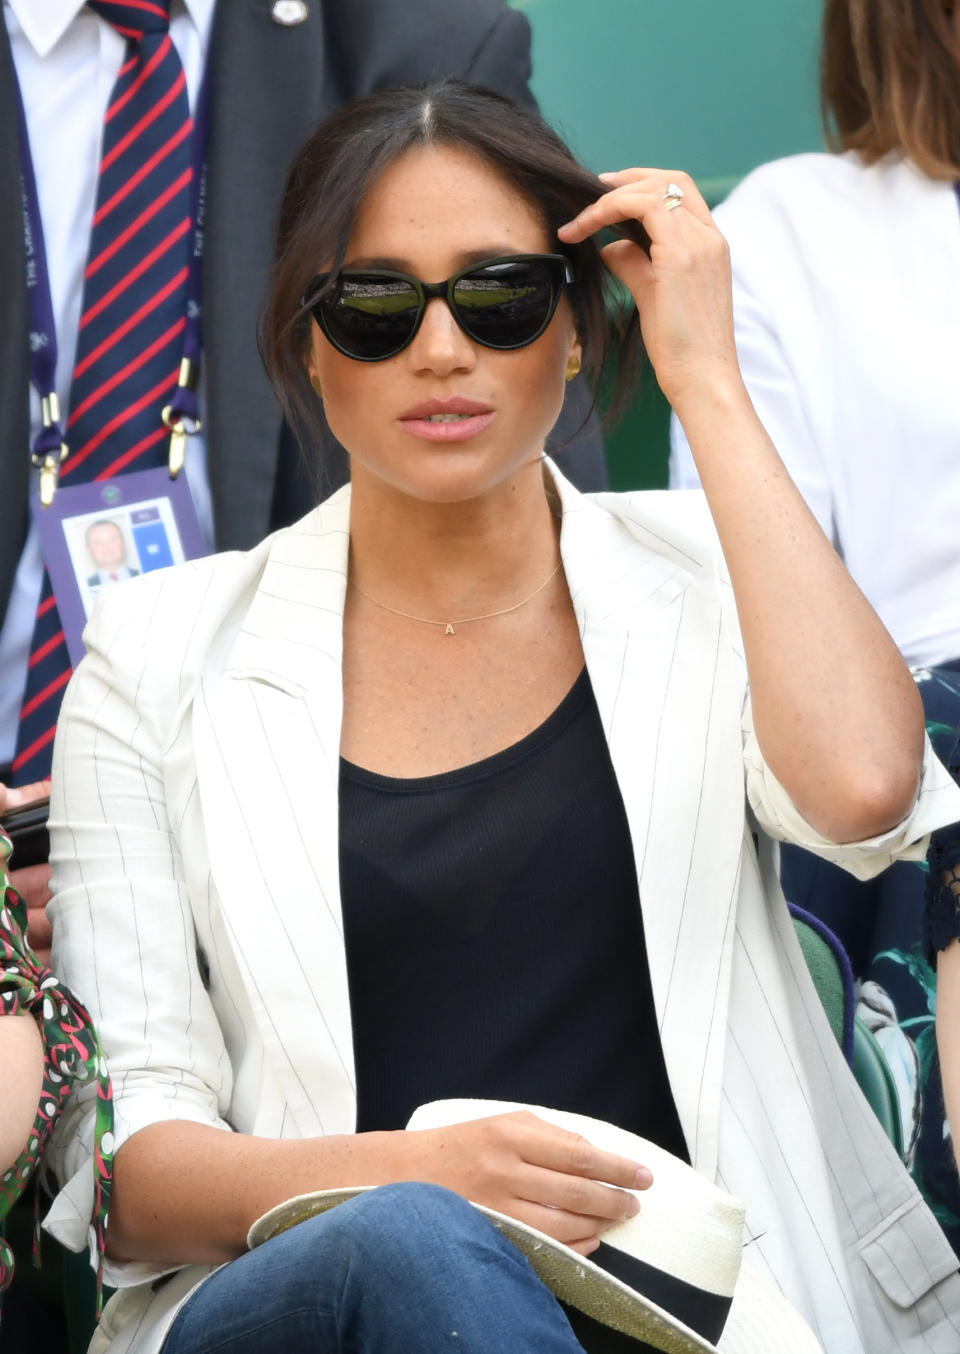 LONDON, ENGLAND - JULY 04: Meghan, Duchess of Sussex attends day four of the Wimbledon Tennis Championships at All England Lawn Tennis and Croquet Club on July 04, 2019 in London, England. (Photo by Karwai Tang/Getty Images)